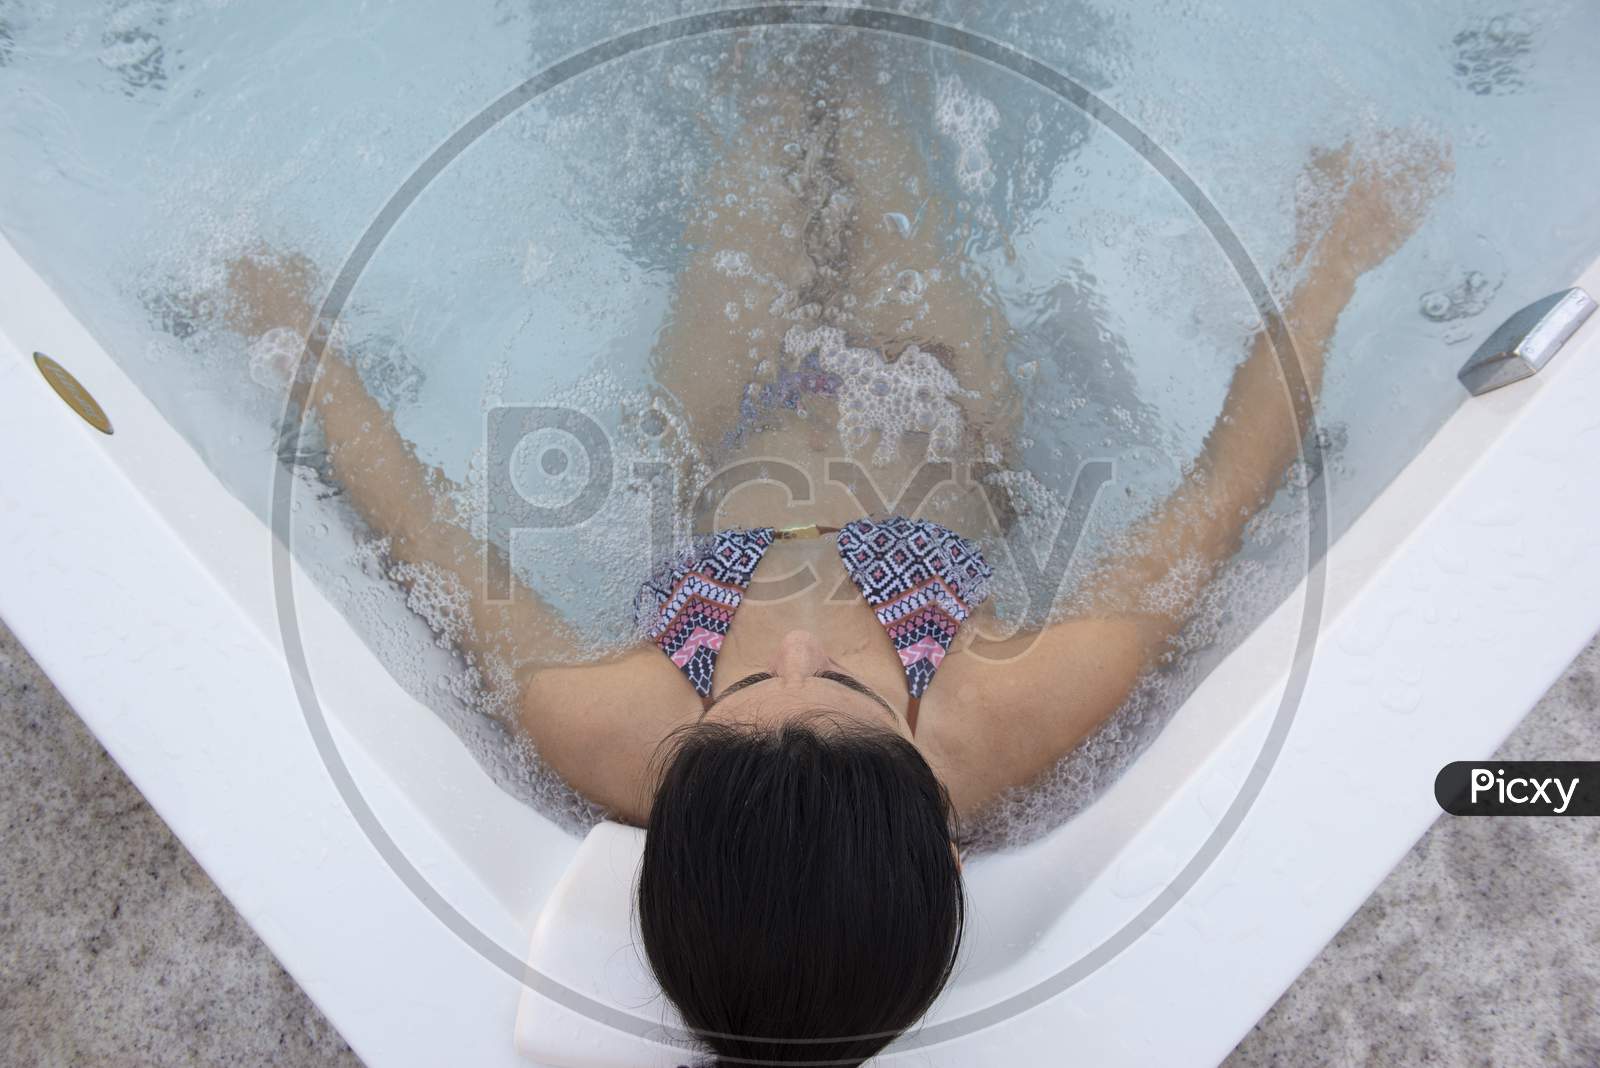 Top View Of Beautiful Bikini Woman In A Hydromassage Bath, , In A Bathing Suit. Concept: Spa Procedures, Body Massages, Spa Cream, Relax, Spa Water Treatments, Swimming Pool.